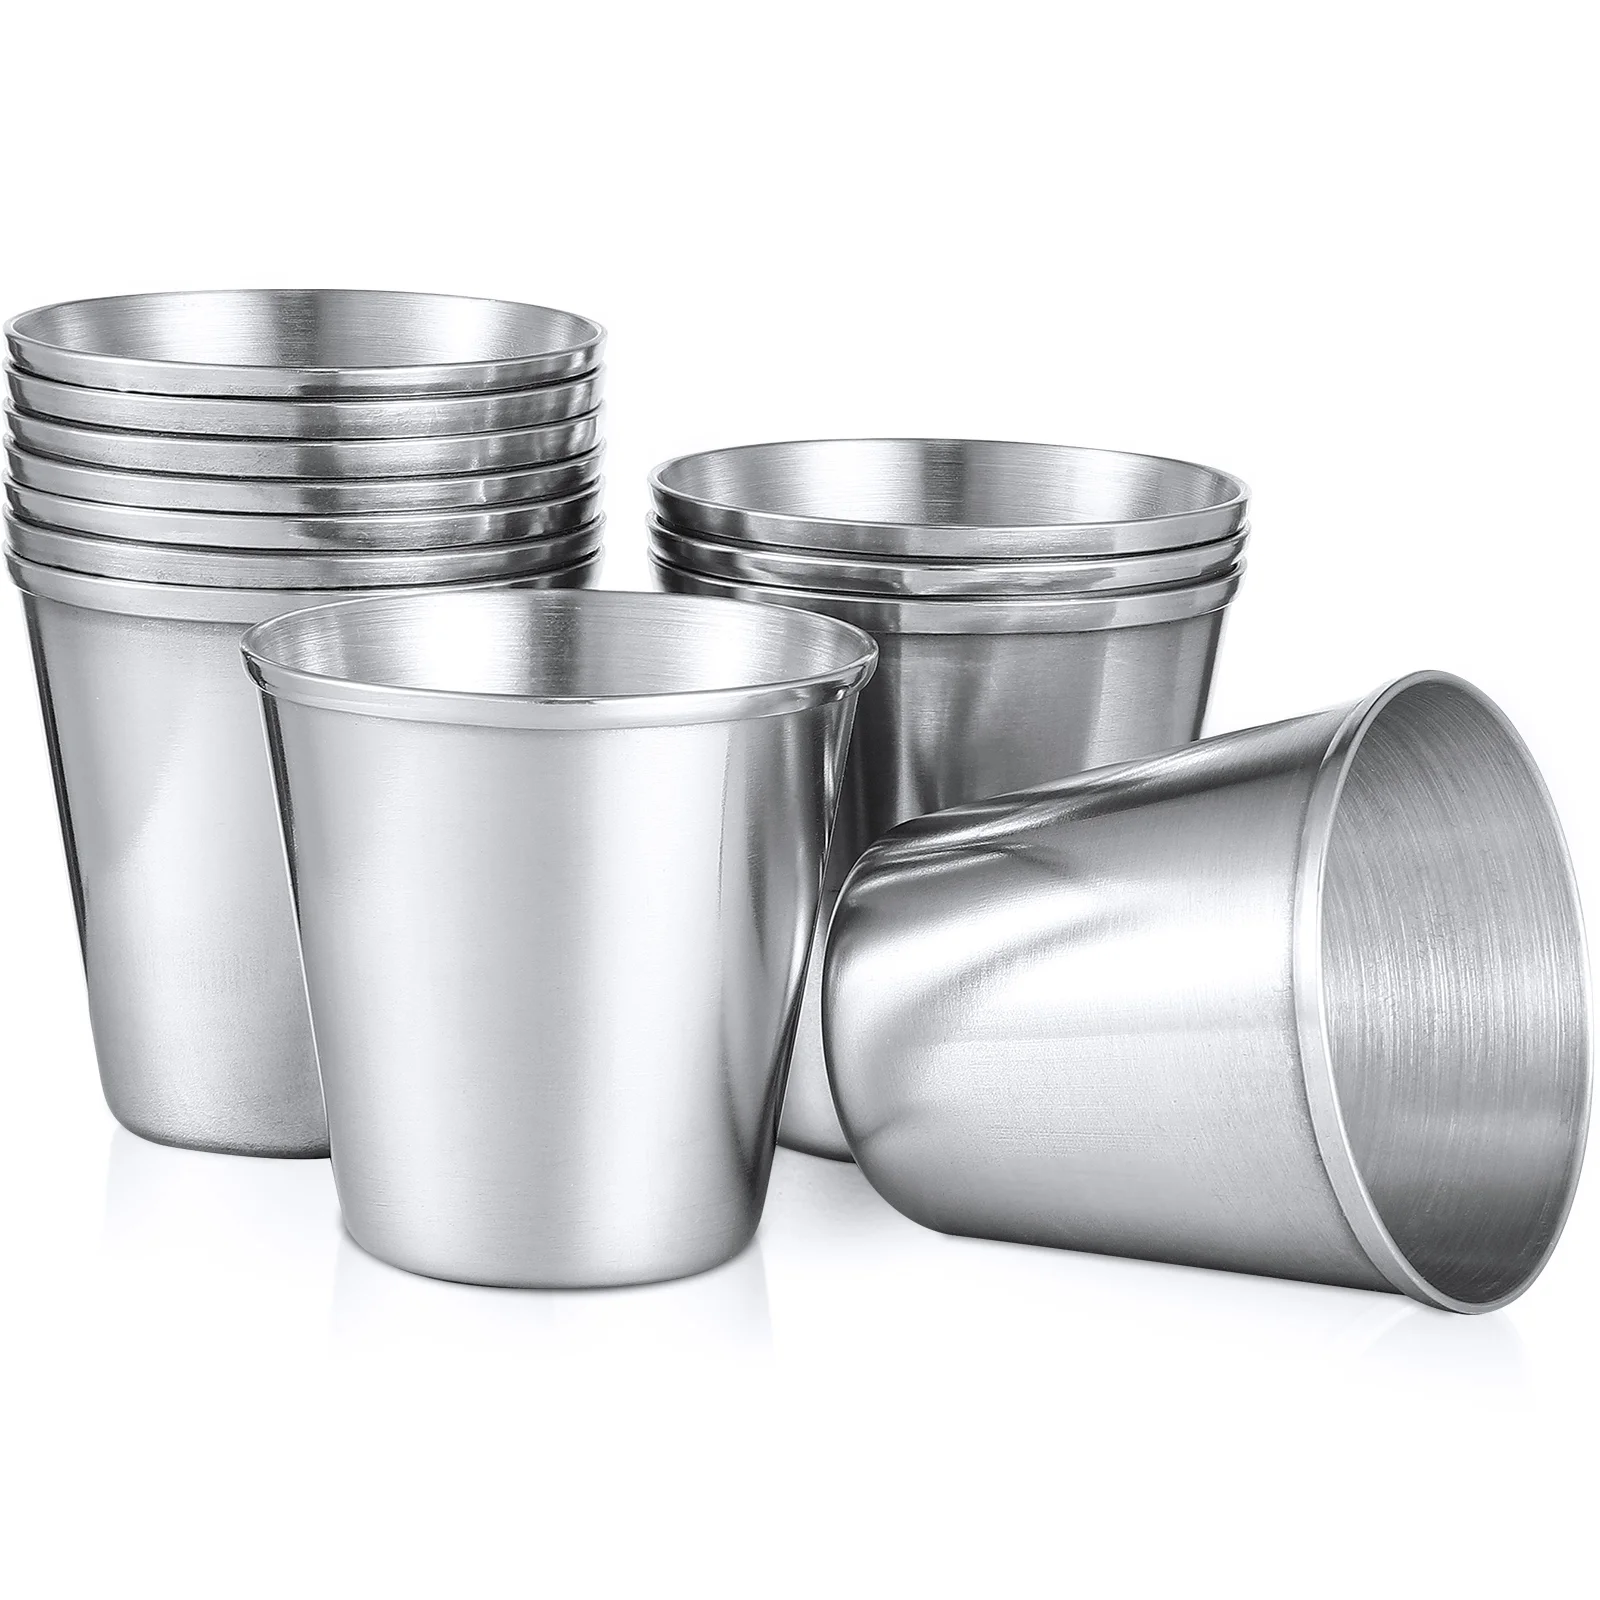 

12 Pcs Stainless Steel Cup Tea Mug Glasses Coffee Tumbler Whiskey Cups Portable Spirits Drinking Vessels Beer